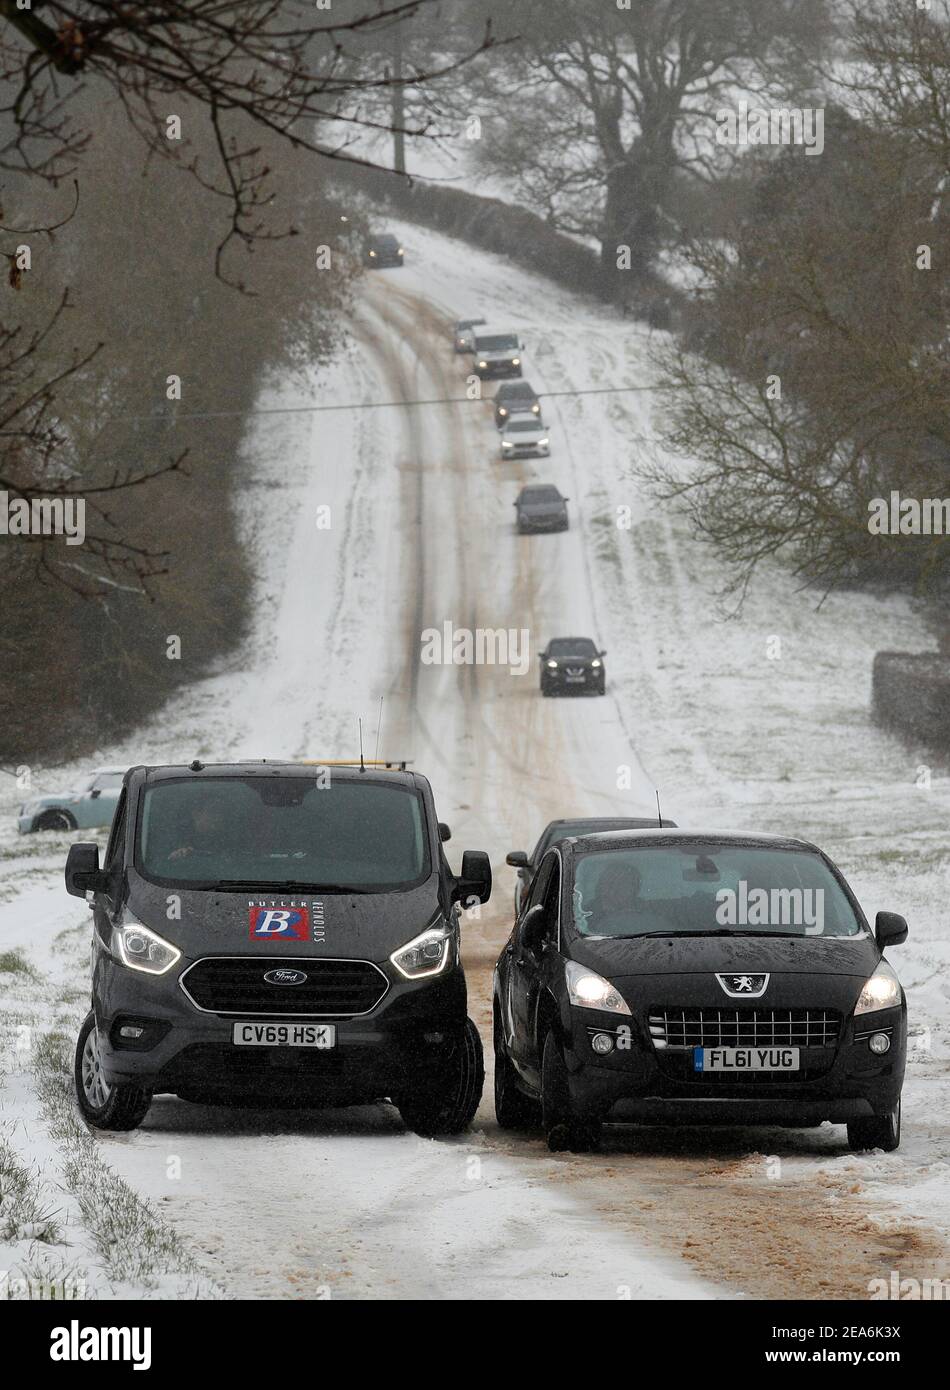 Uppingham, Rutland, UK. 8th February 2021. UK weather. Stranded motorists sit on a snow and ice covered hill. Credit Darren Staples/Alamy Live News. Stock Photo